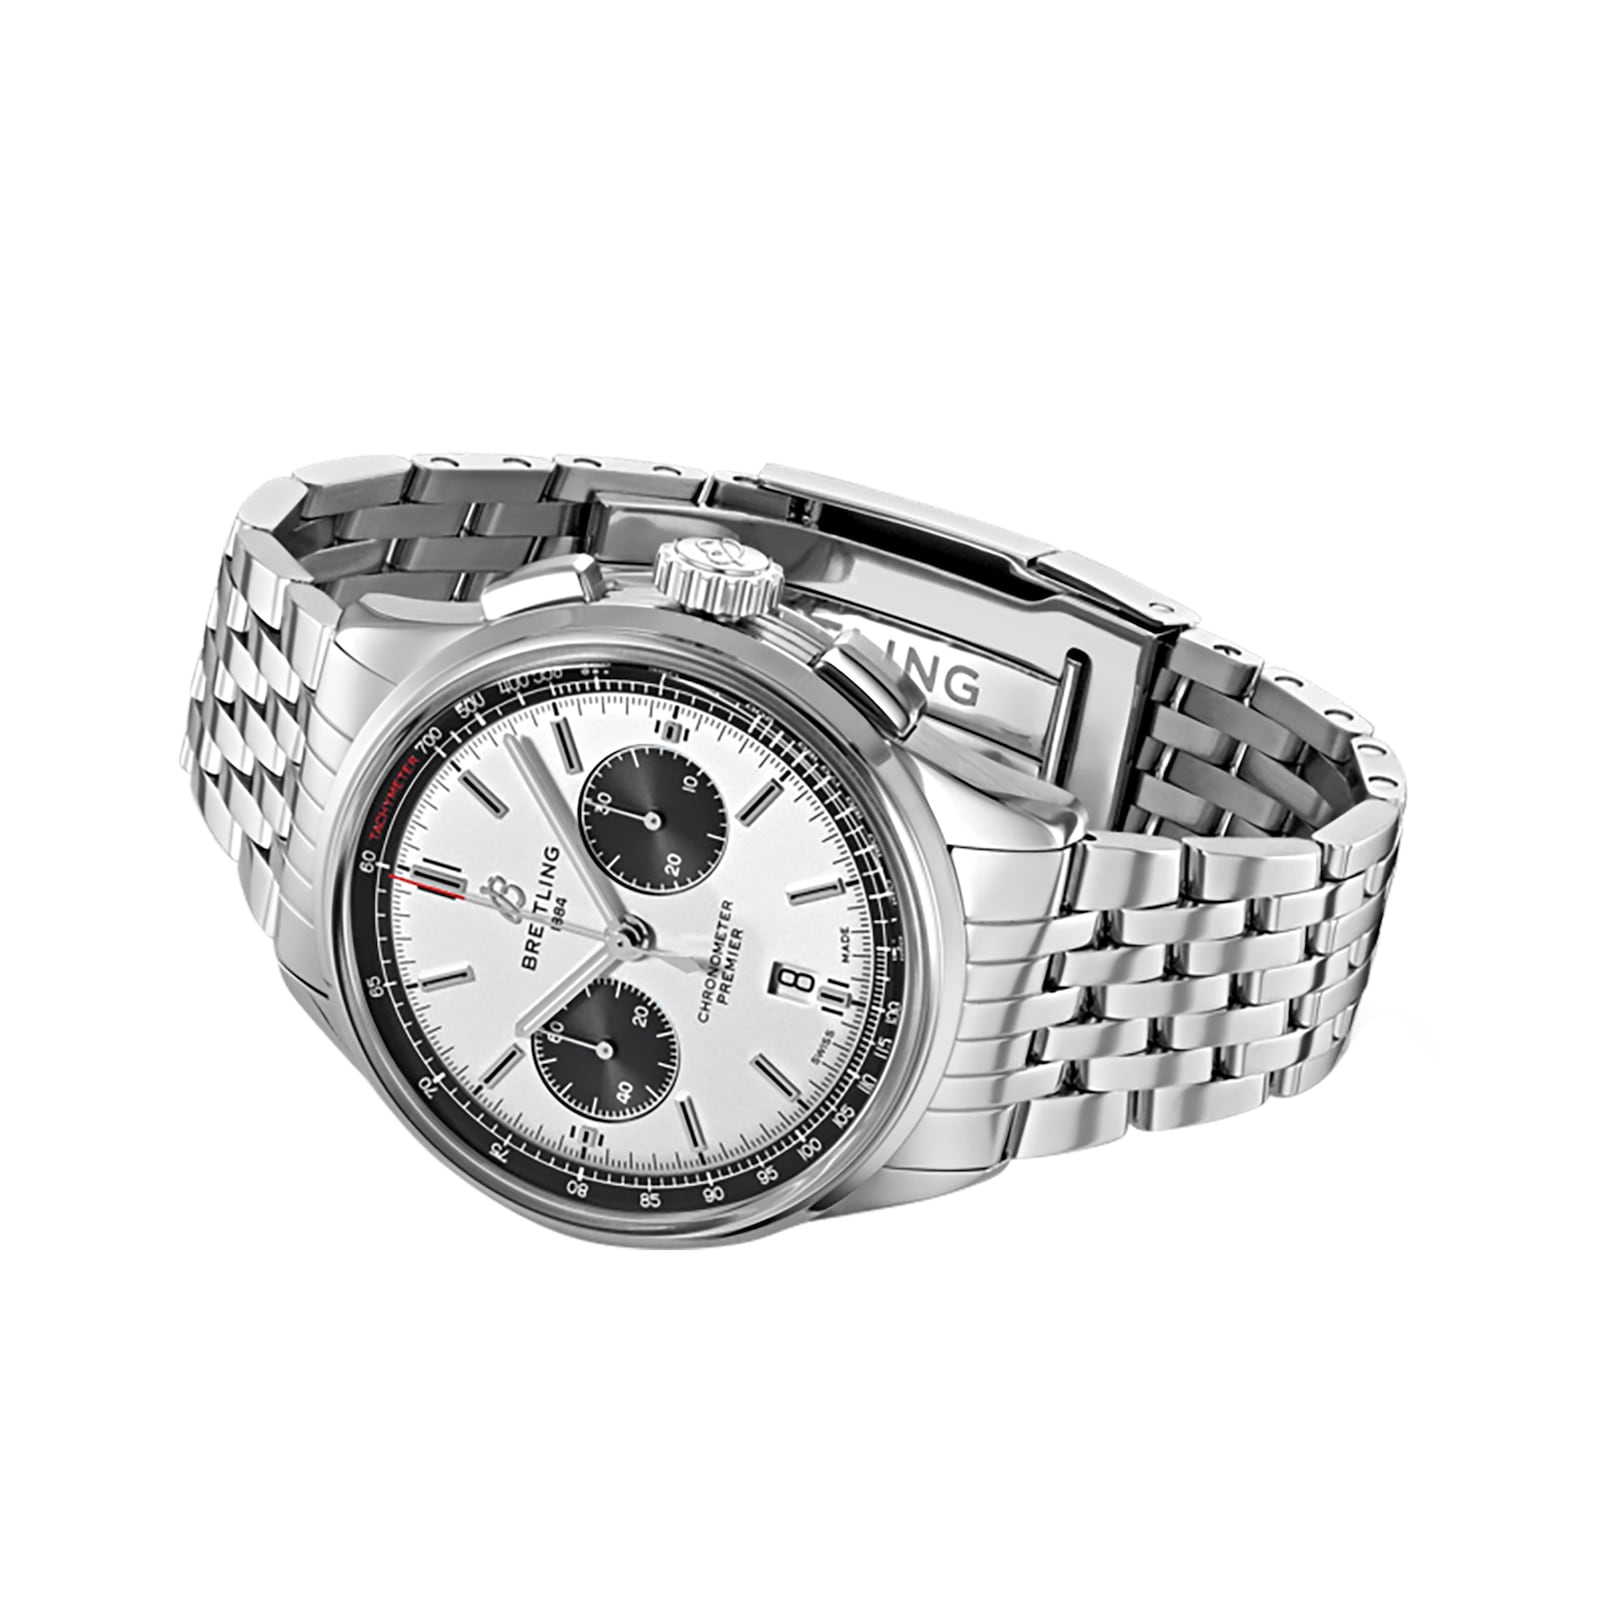 Breitling Premier B01 Chronograph 42 Stainless Steel Watch ...